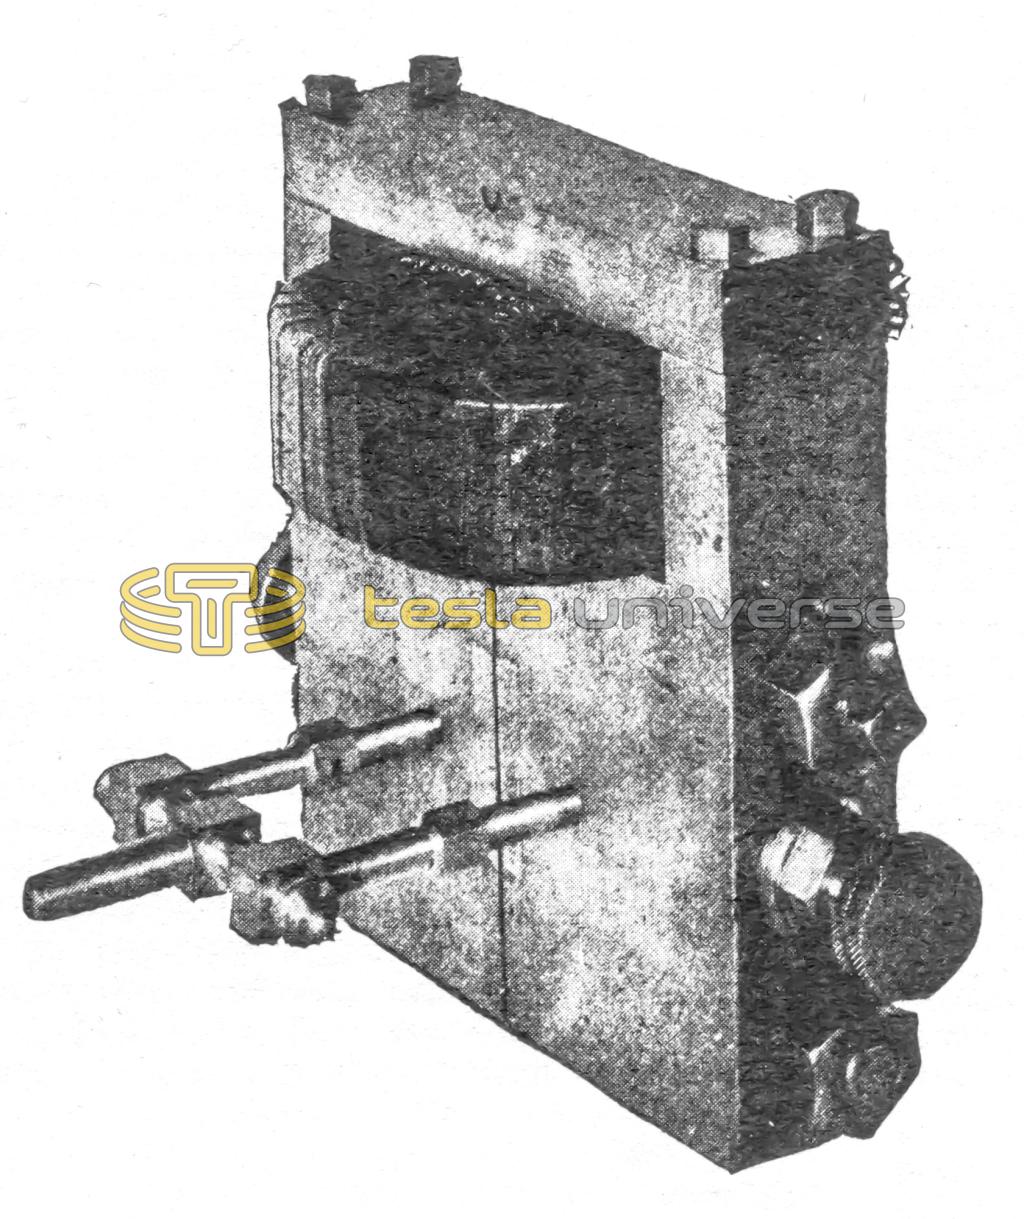 Unique alternating current generator operated by high-pressure vibrating a diaphragm coil